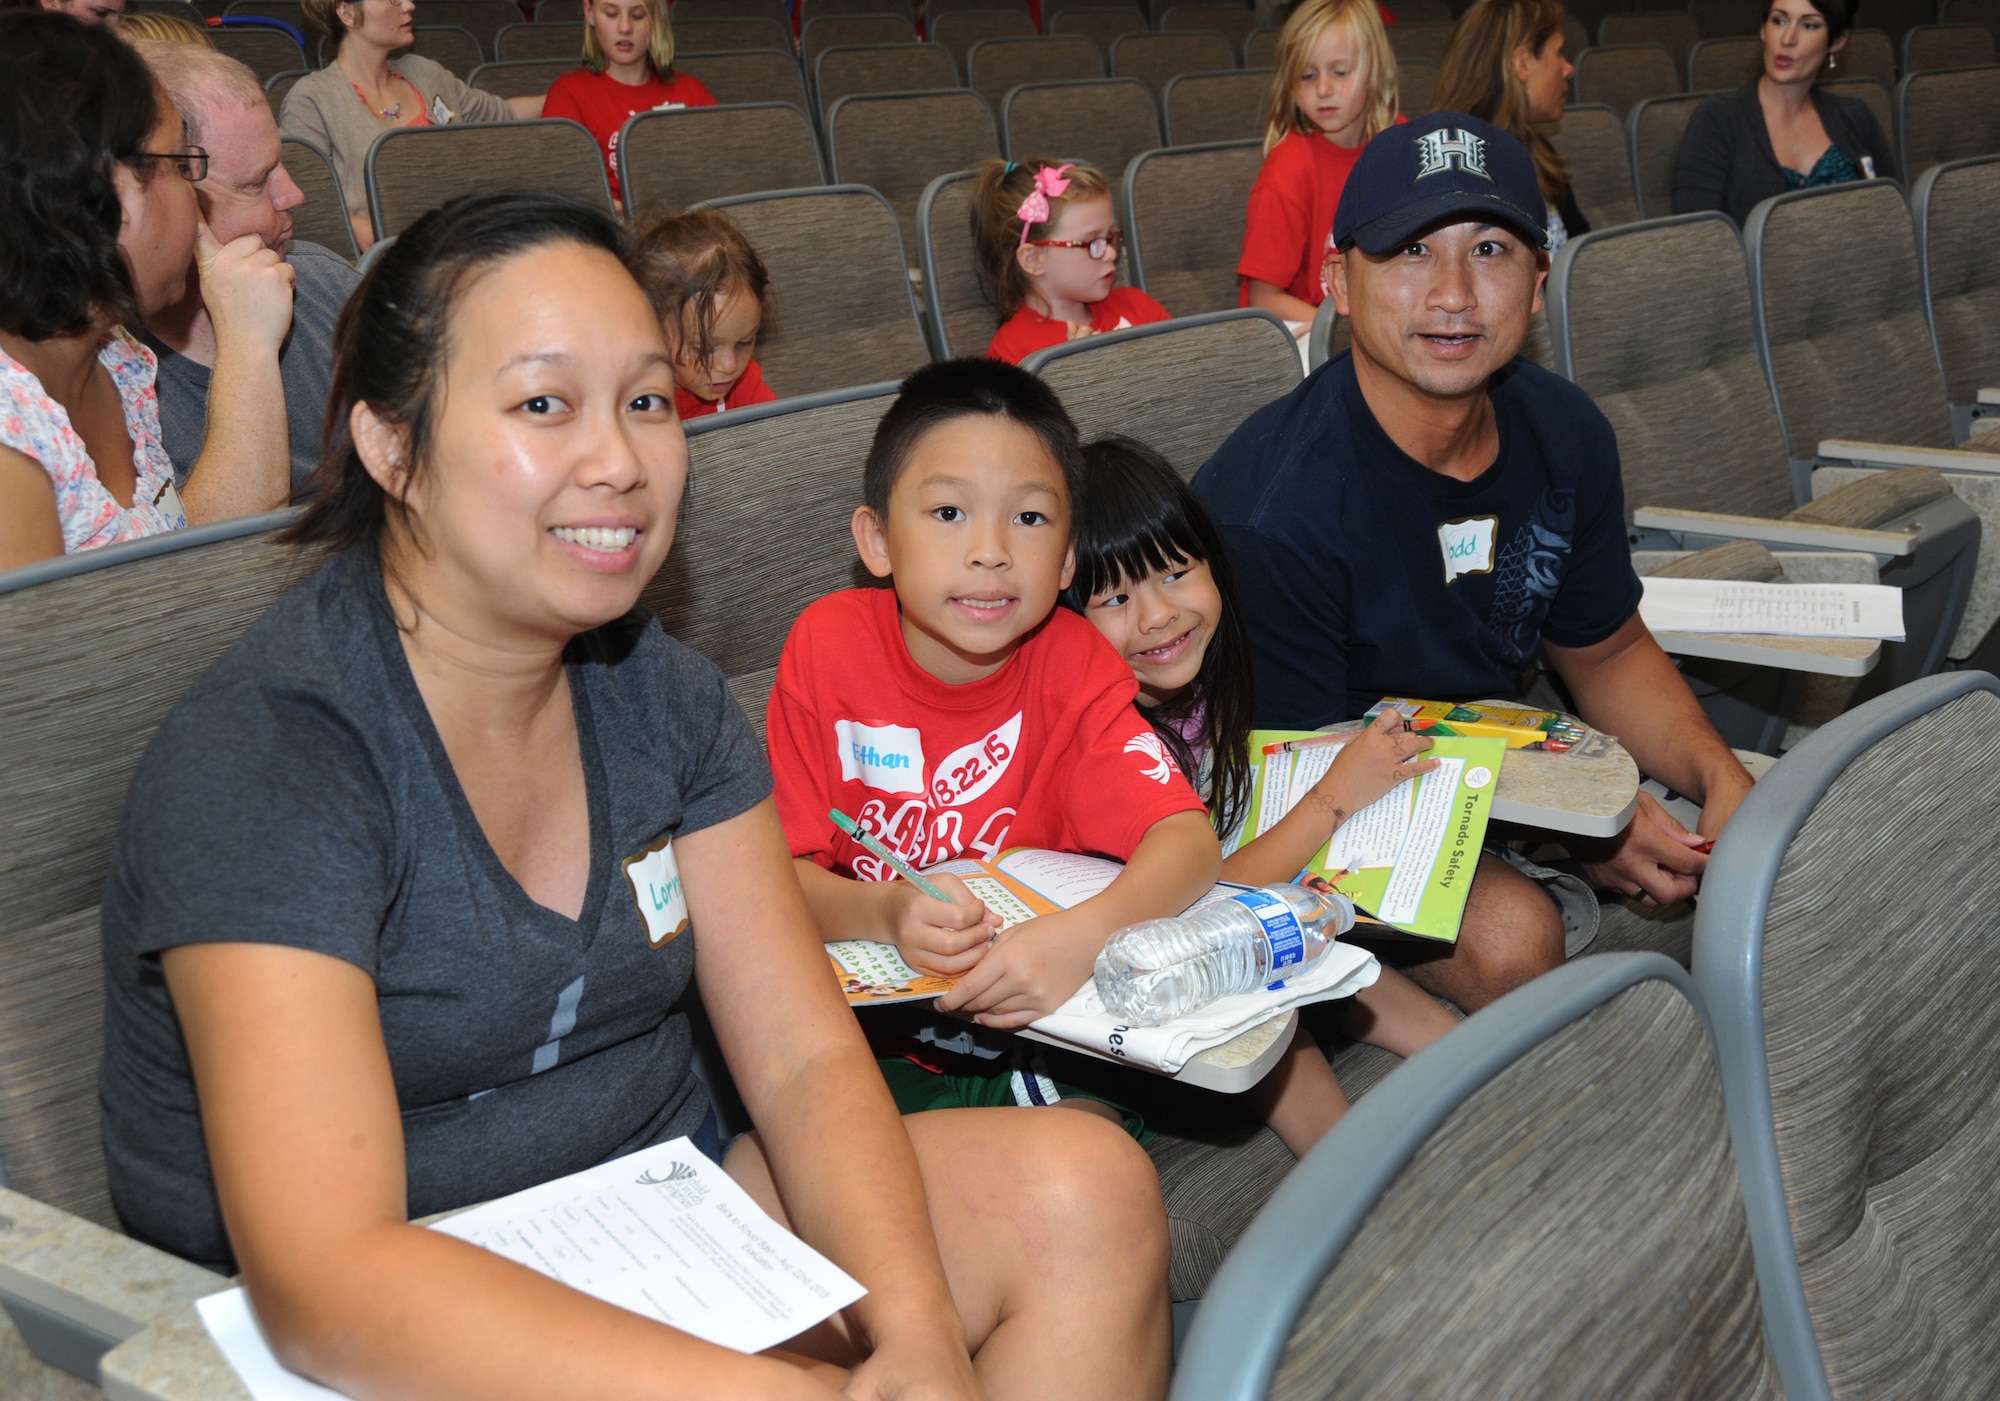 Air National Guard Master Sgt. Todd Le and his family review materials as the Back2School Bash concludes, Aug. 22, 2015, Camp Withycombe, Ore. (U.S. Air National Guard photo by Tech. Sgt. John Hughel, 142nd Fighter Wing Public Affairs/Released)